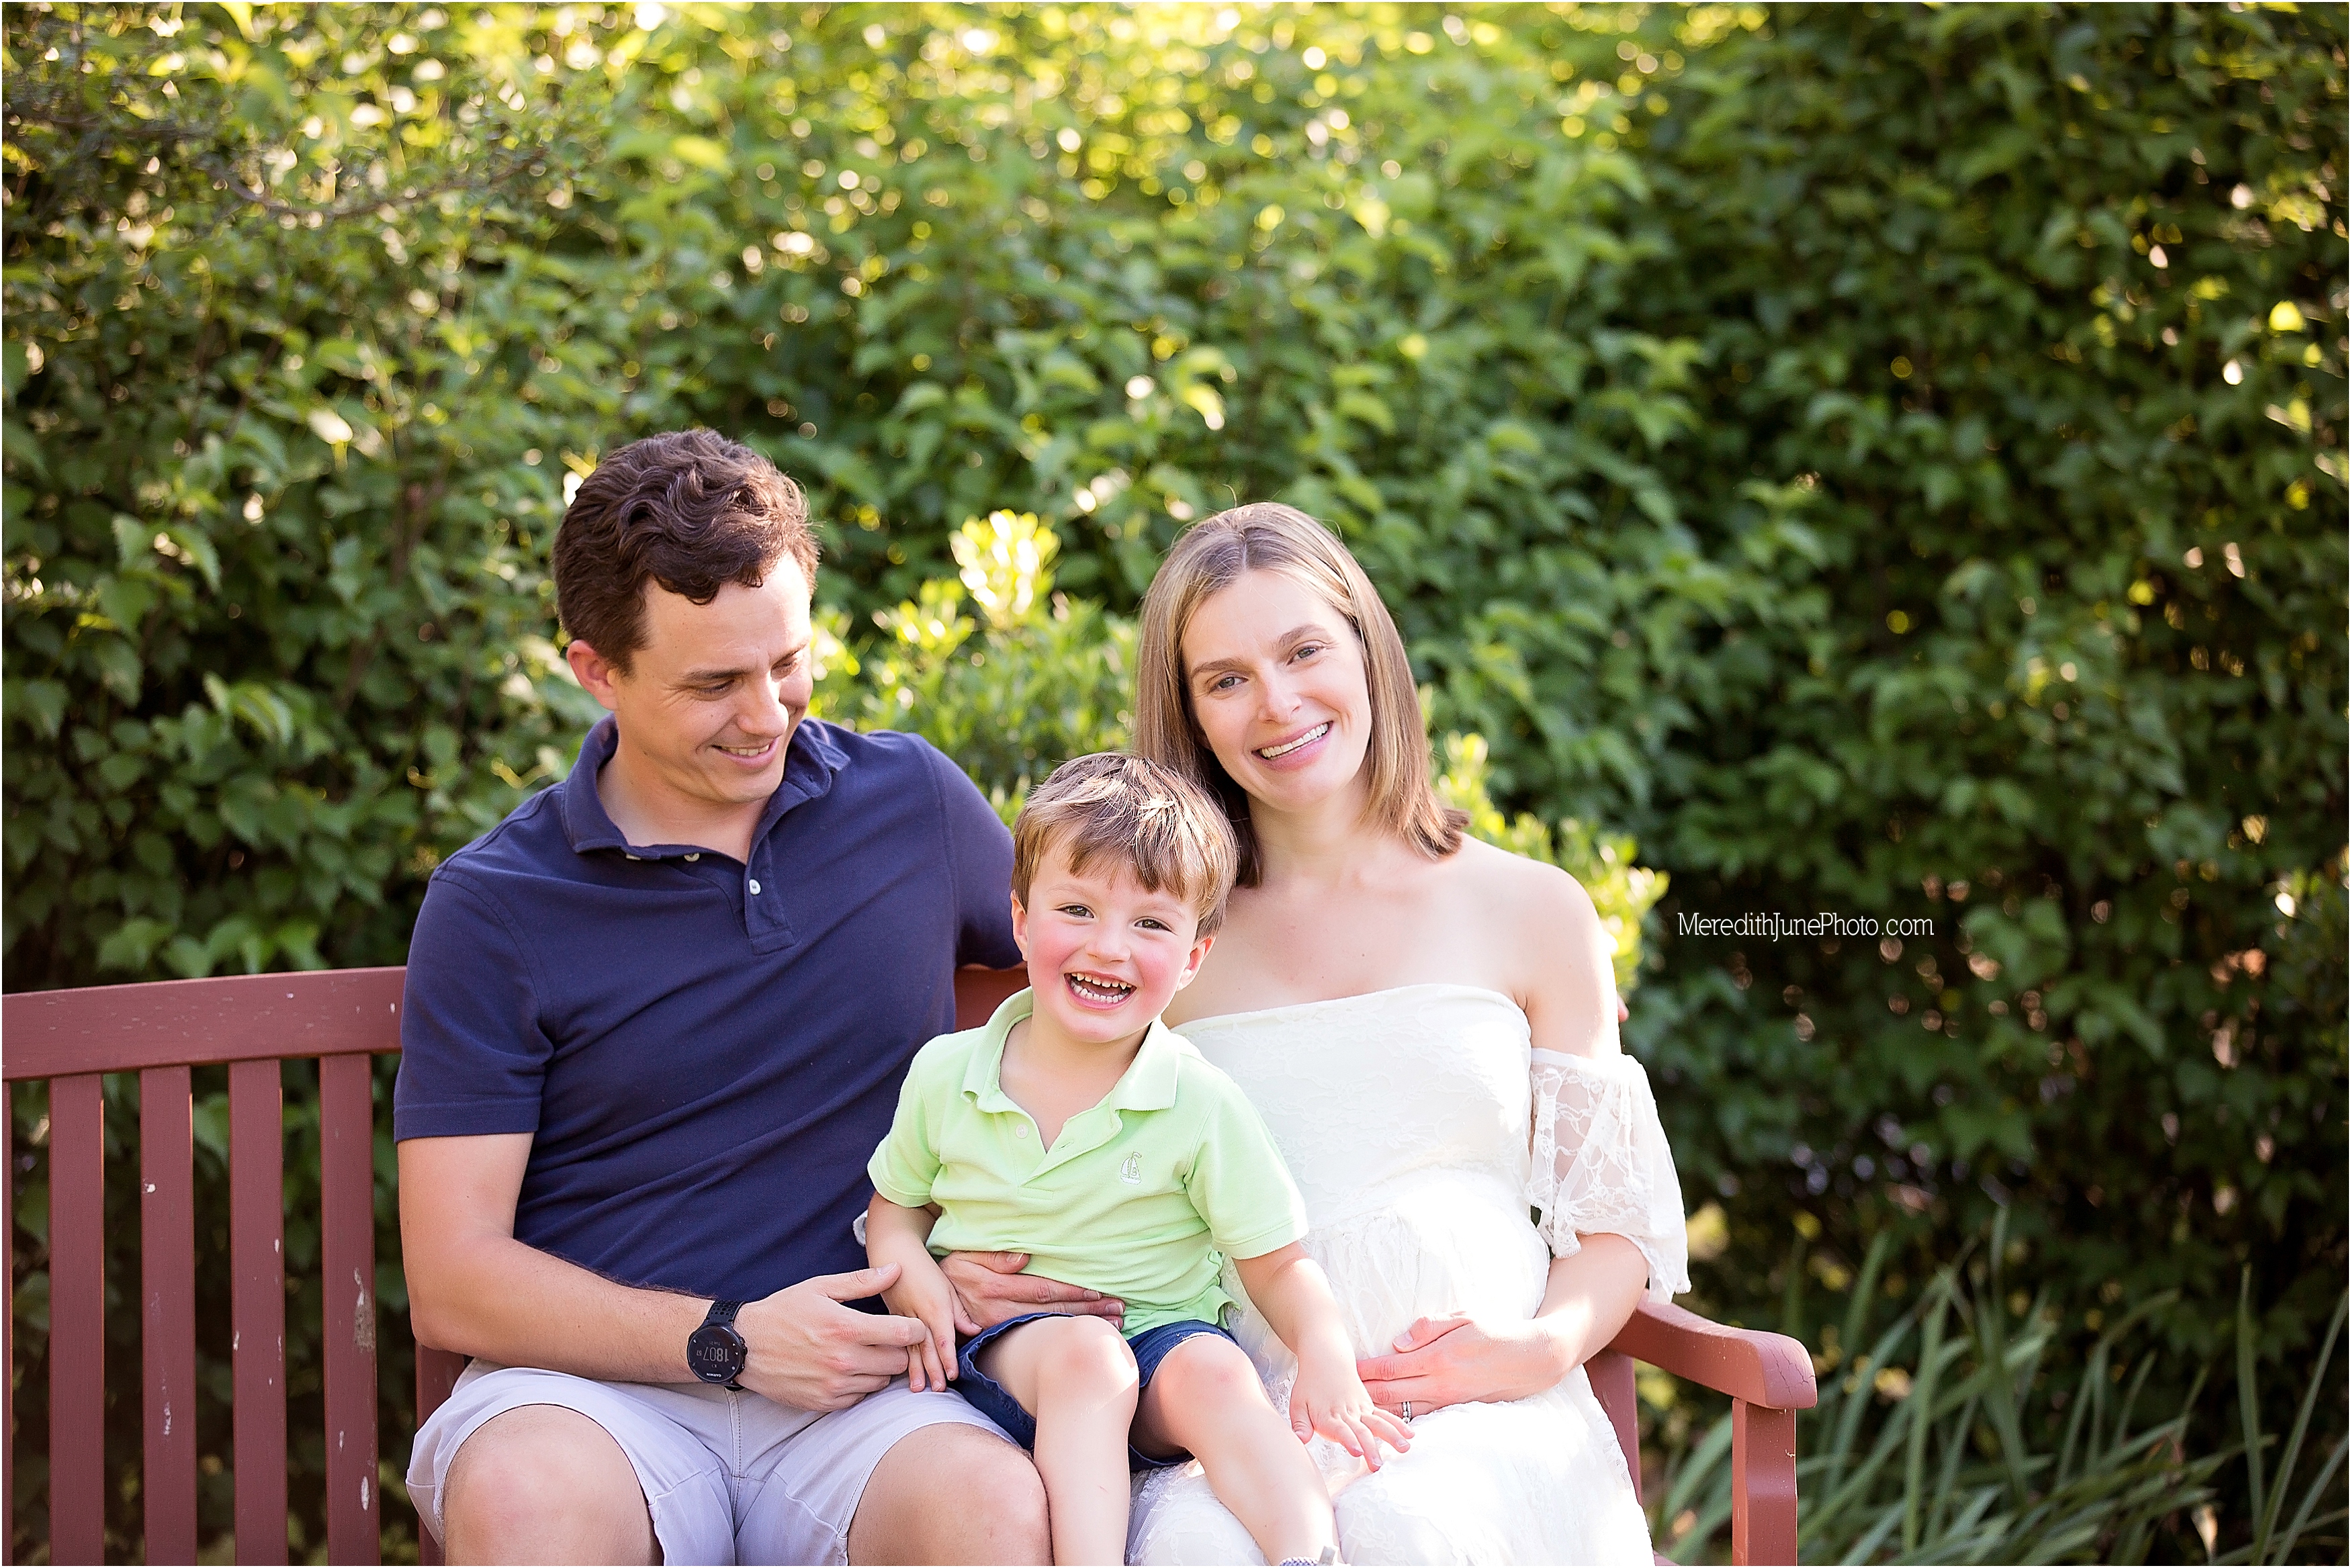 beautiful outdoor family and pregnancy session in the park in Charlotte area